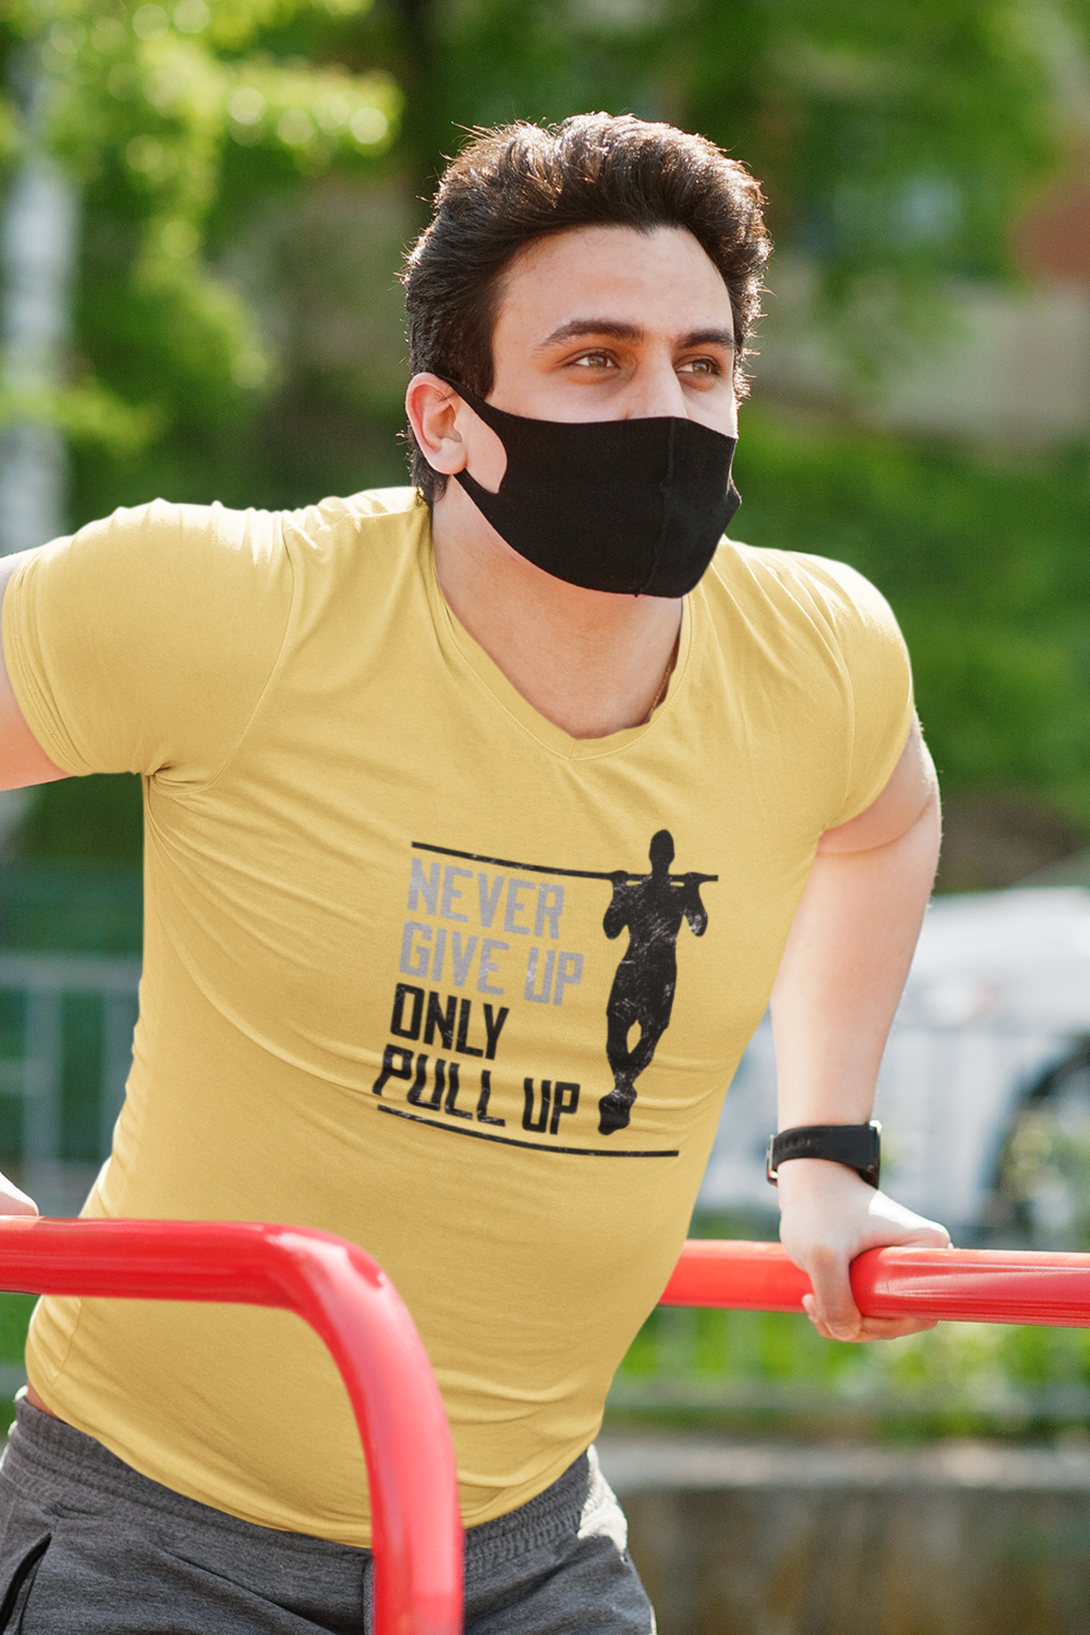 Never Give Up Only Pull Up Printed T-Shirt For Men - WowWaves - 2